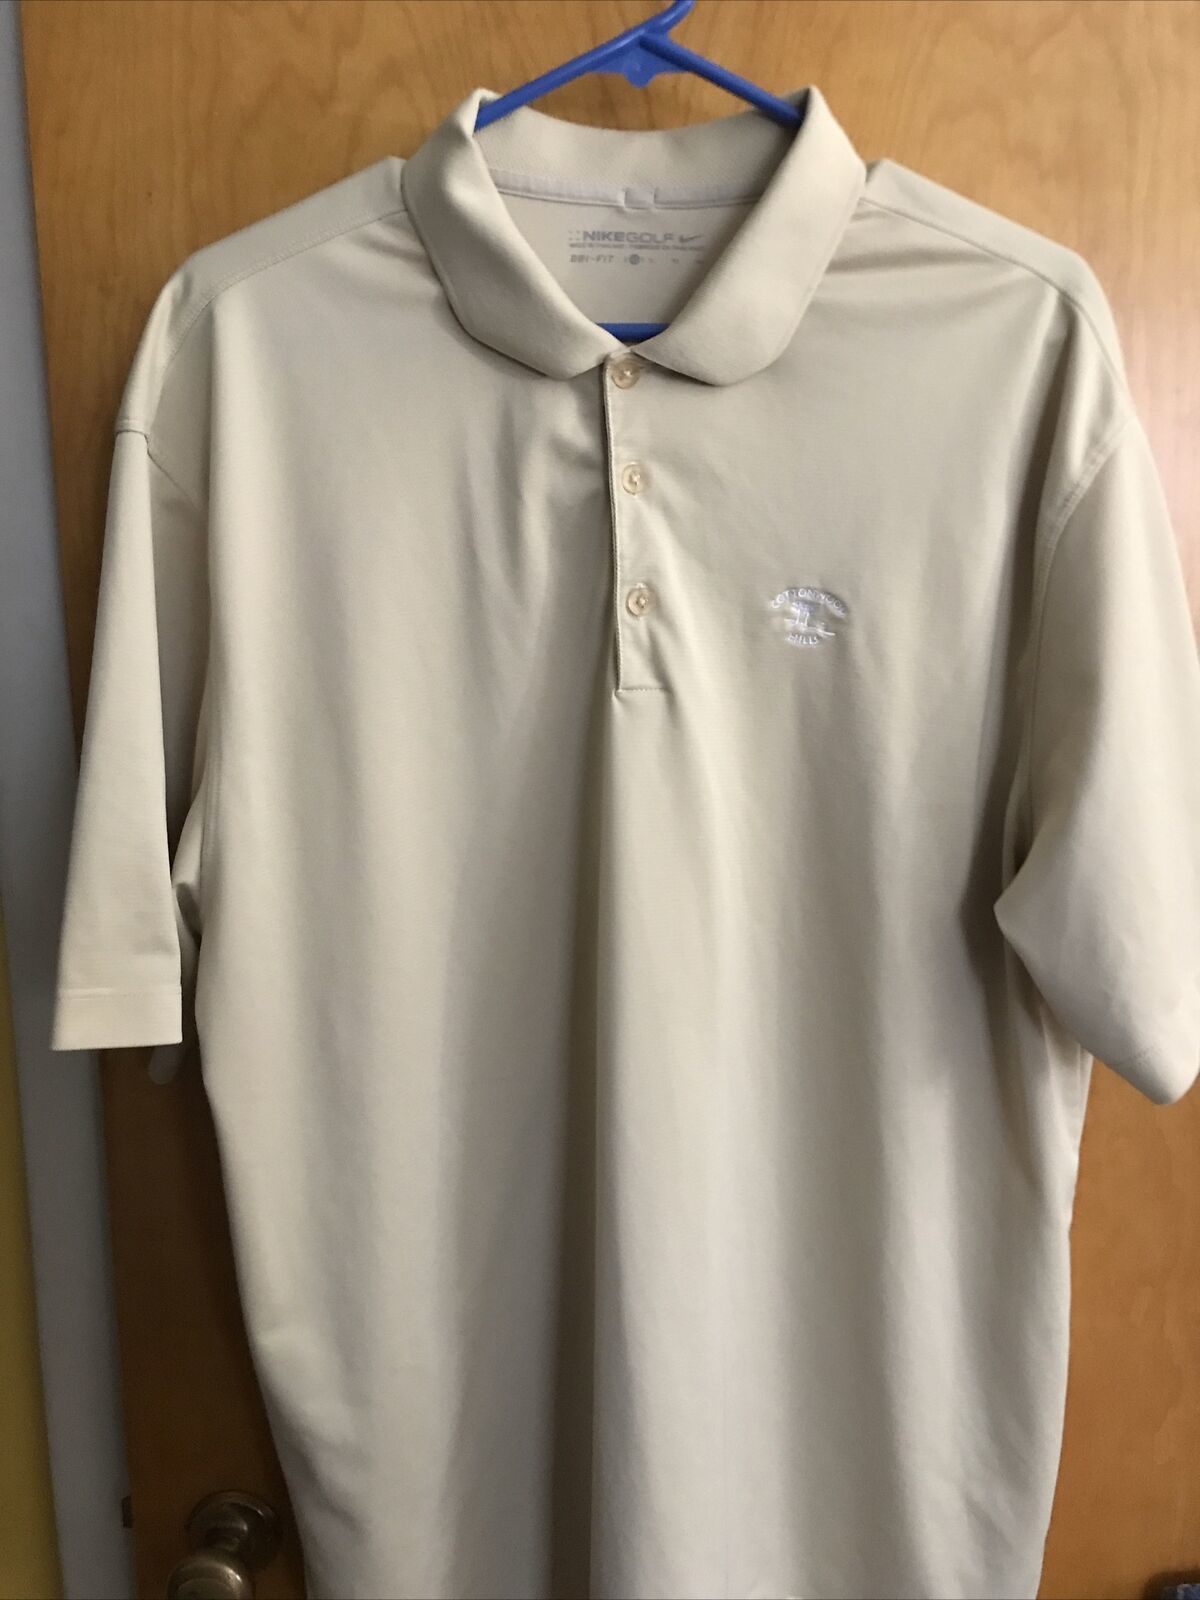 Primary image for Nike Golf Dri Fit Men’s XL Beige Short Sleeve 1/4 Button Polyester Polo Shirt